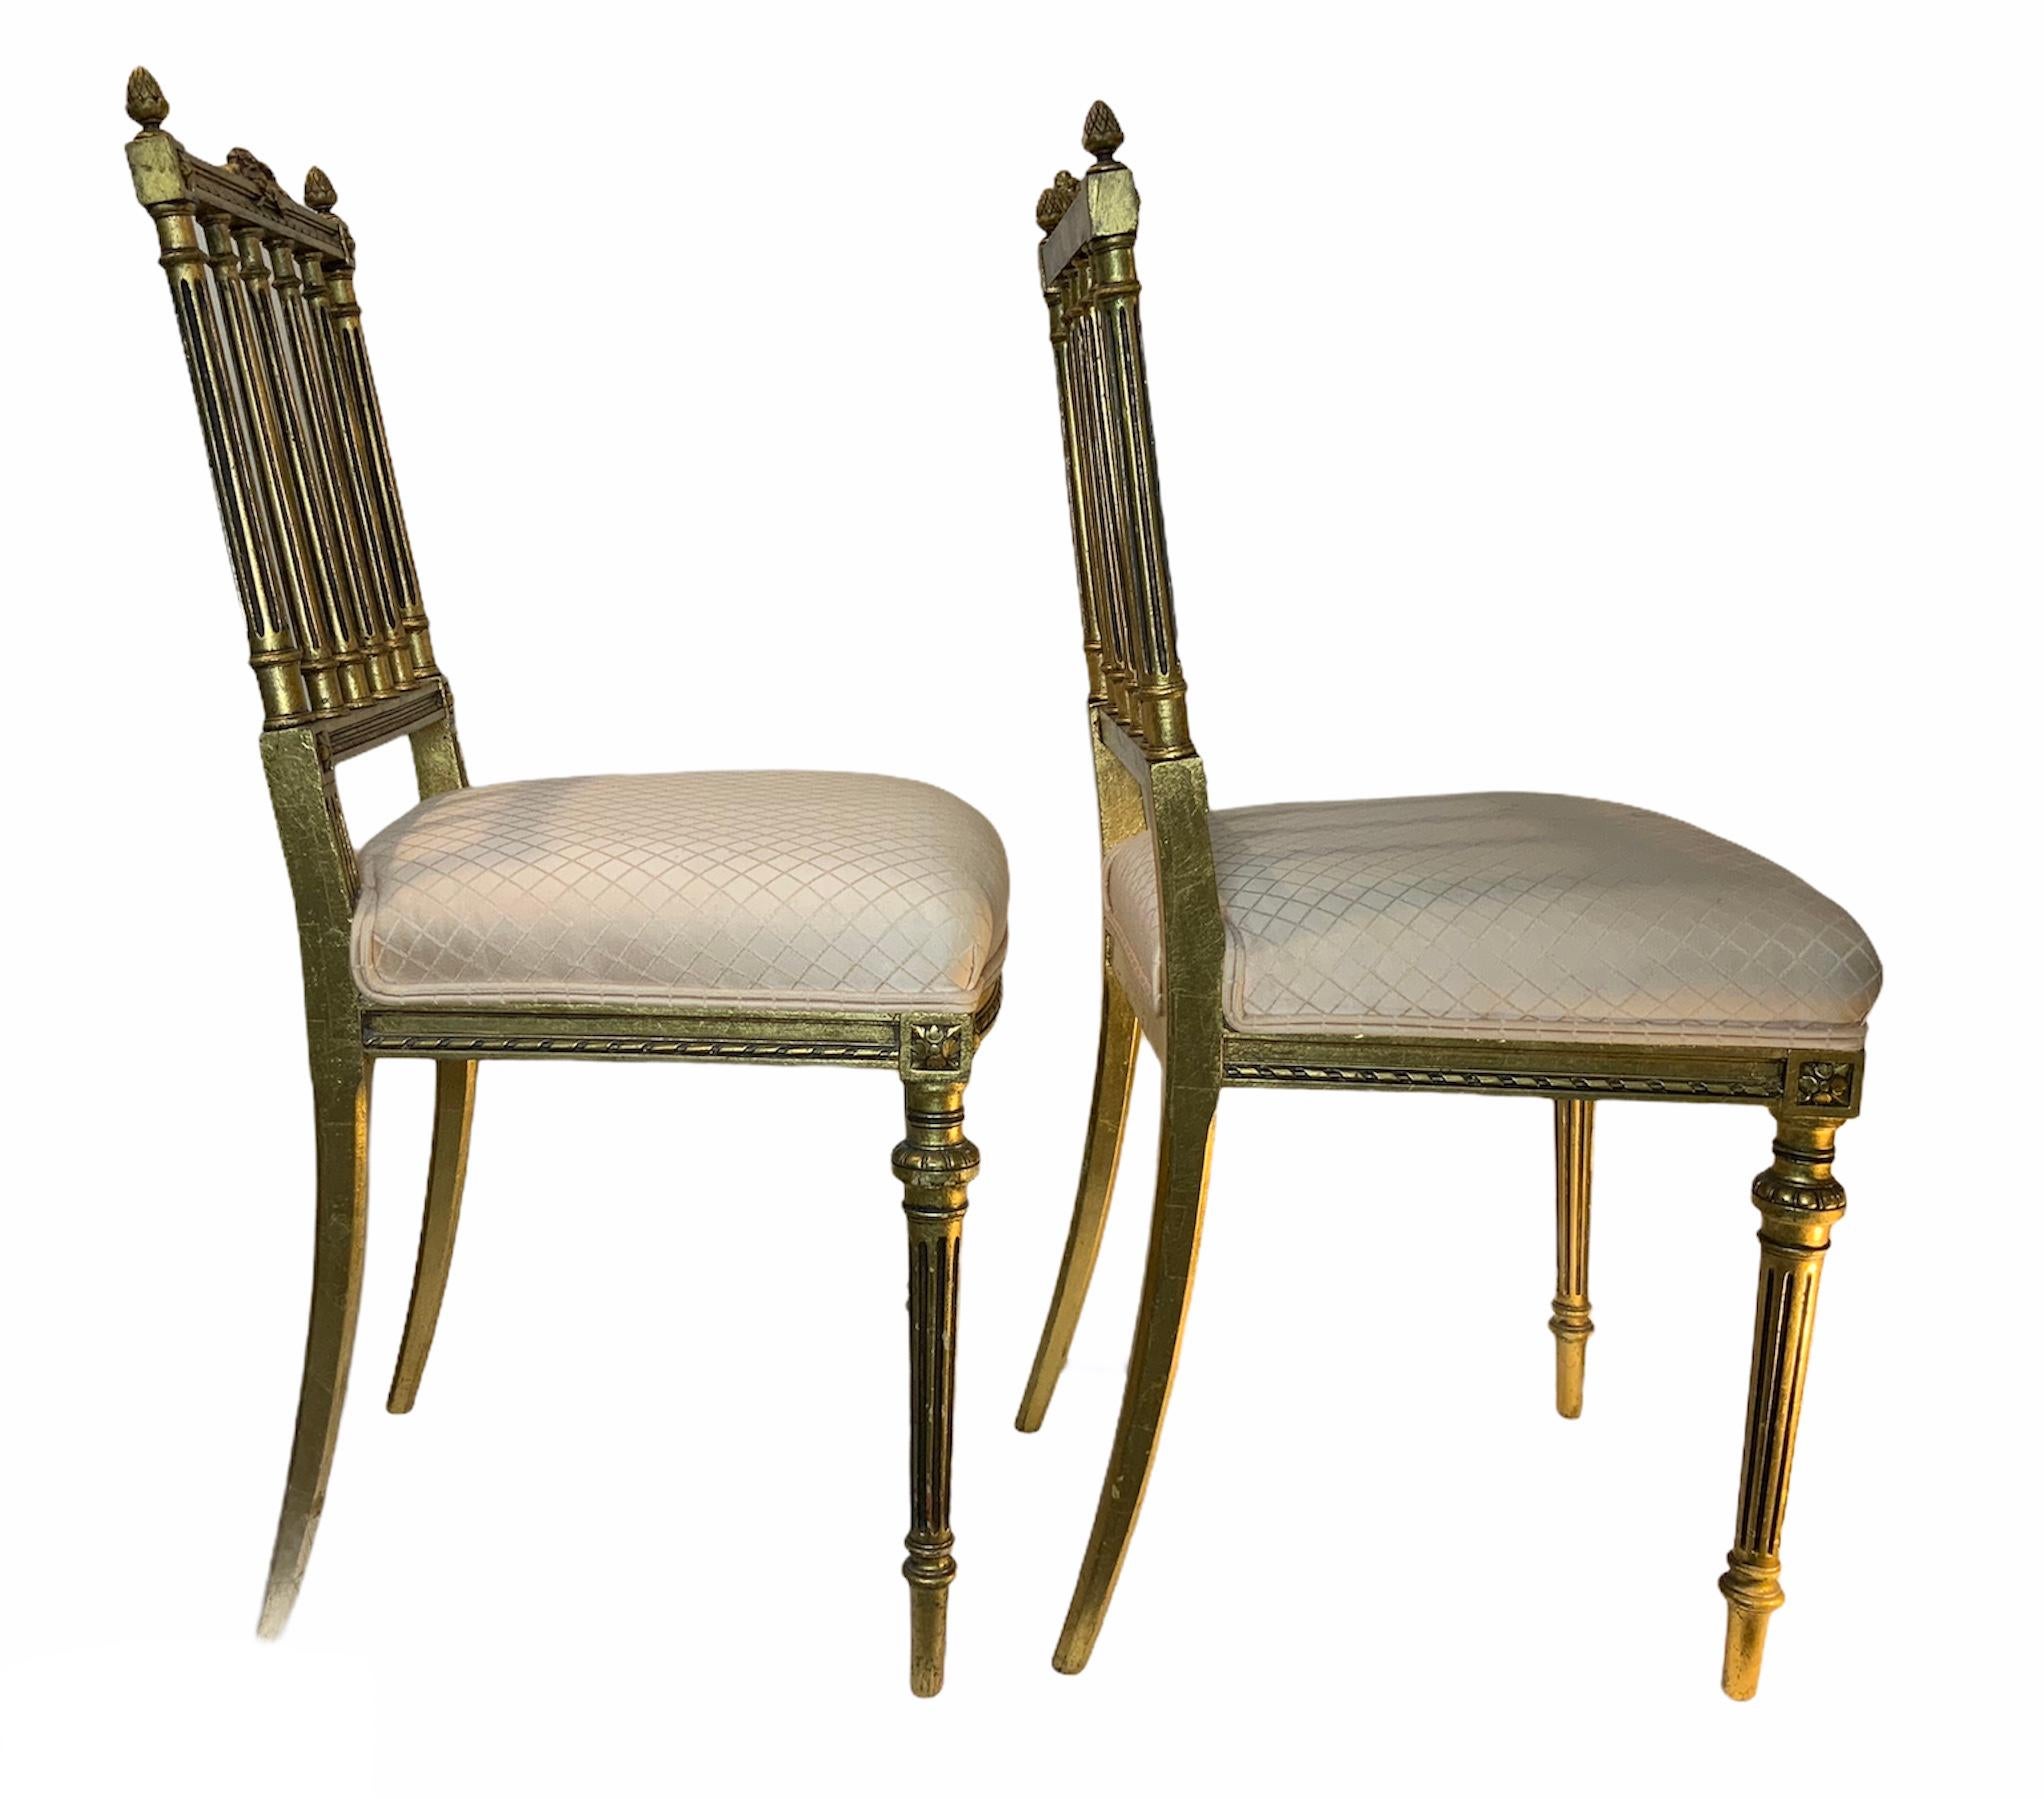 This is a pair of Sheraton style gilt wood chairs that have square back with six fluted balusters. The upper center borders of the chairs are adorned with a wreath of flowers that have a bow with two long legs of ribbons folded in each side of it.